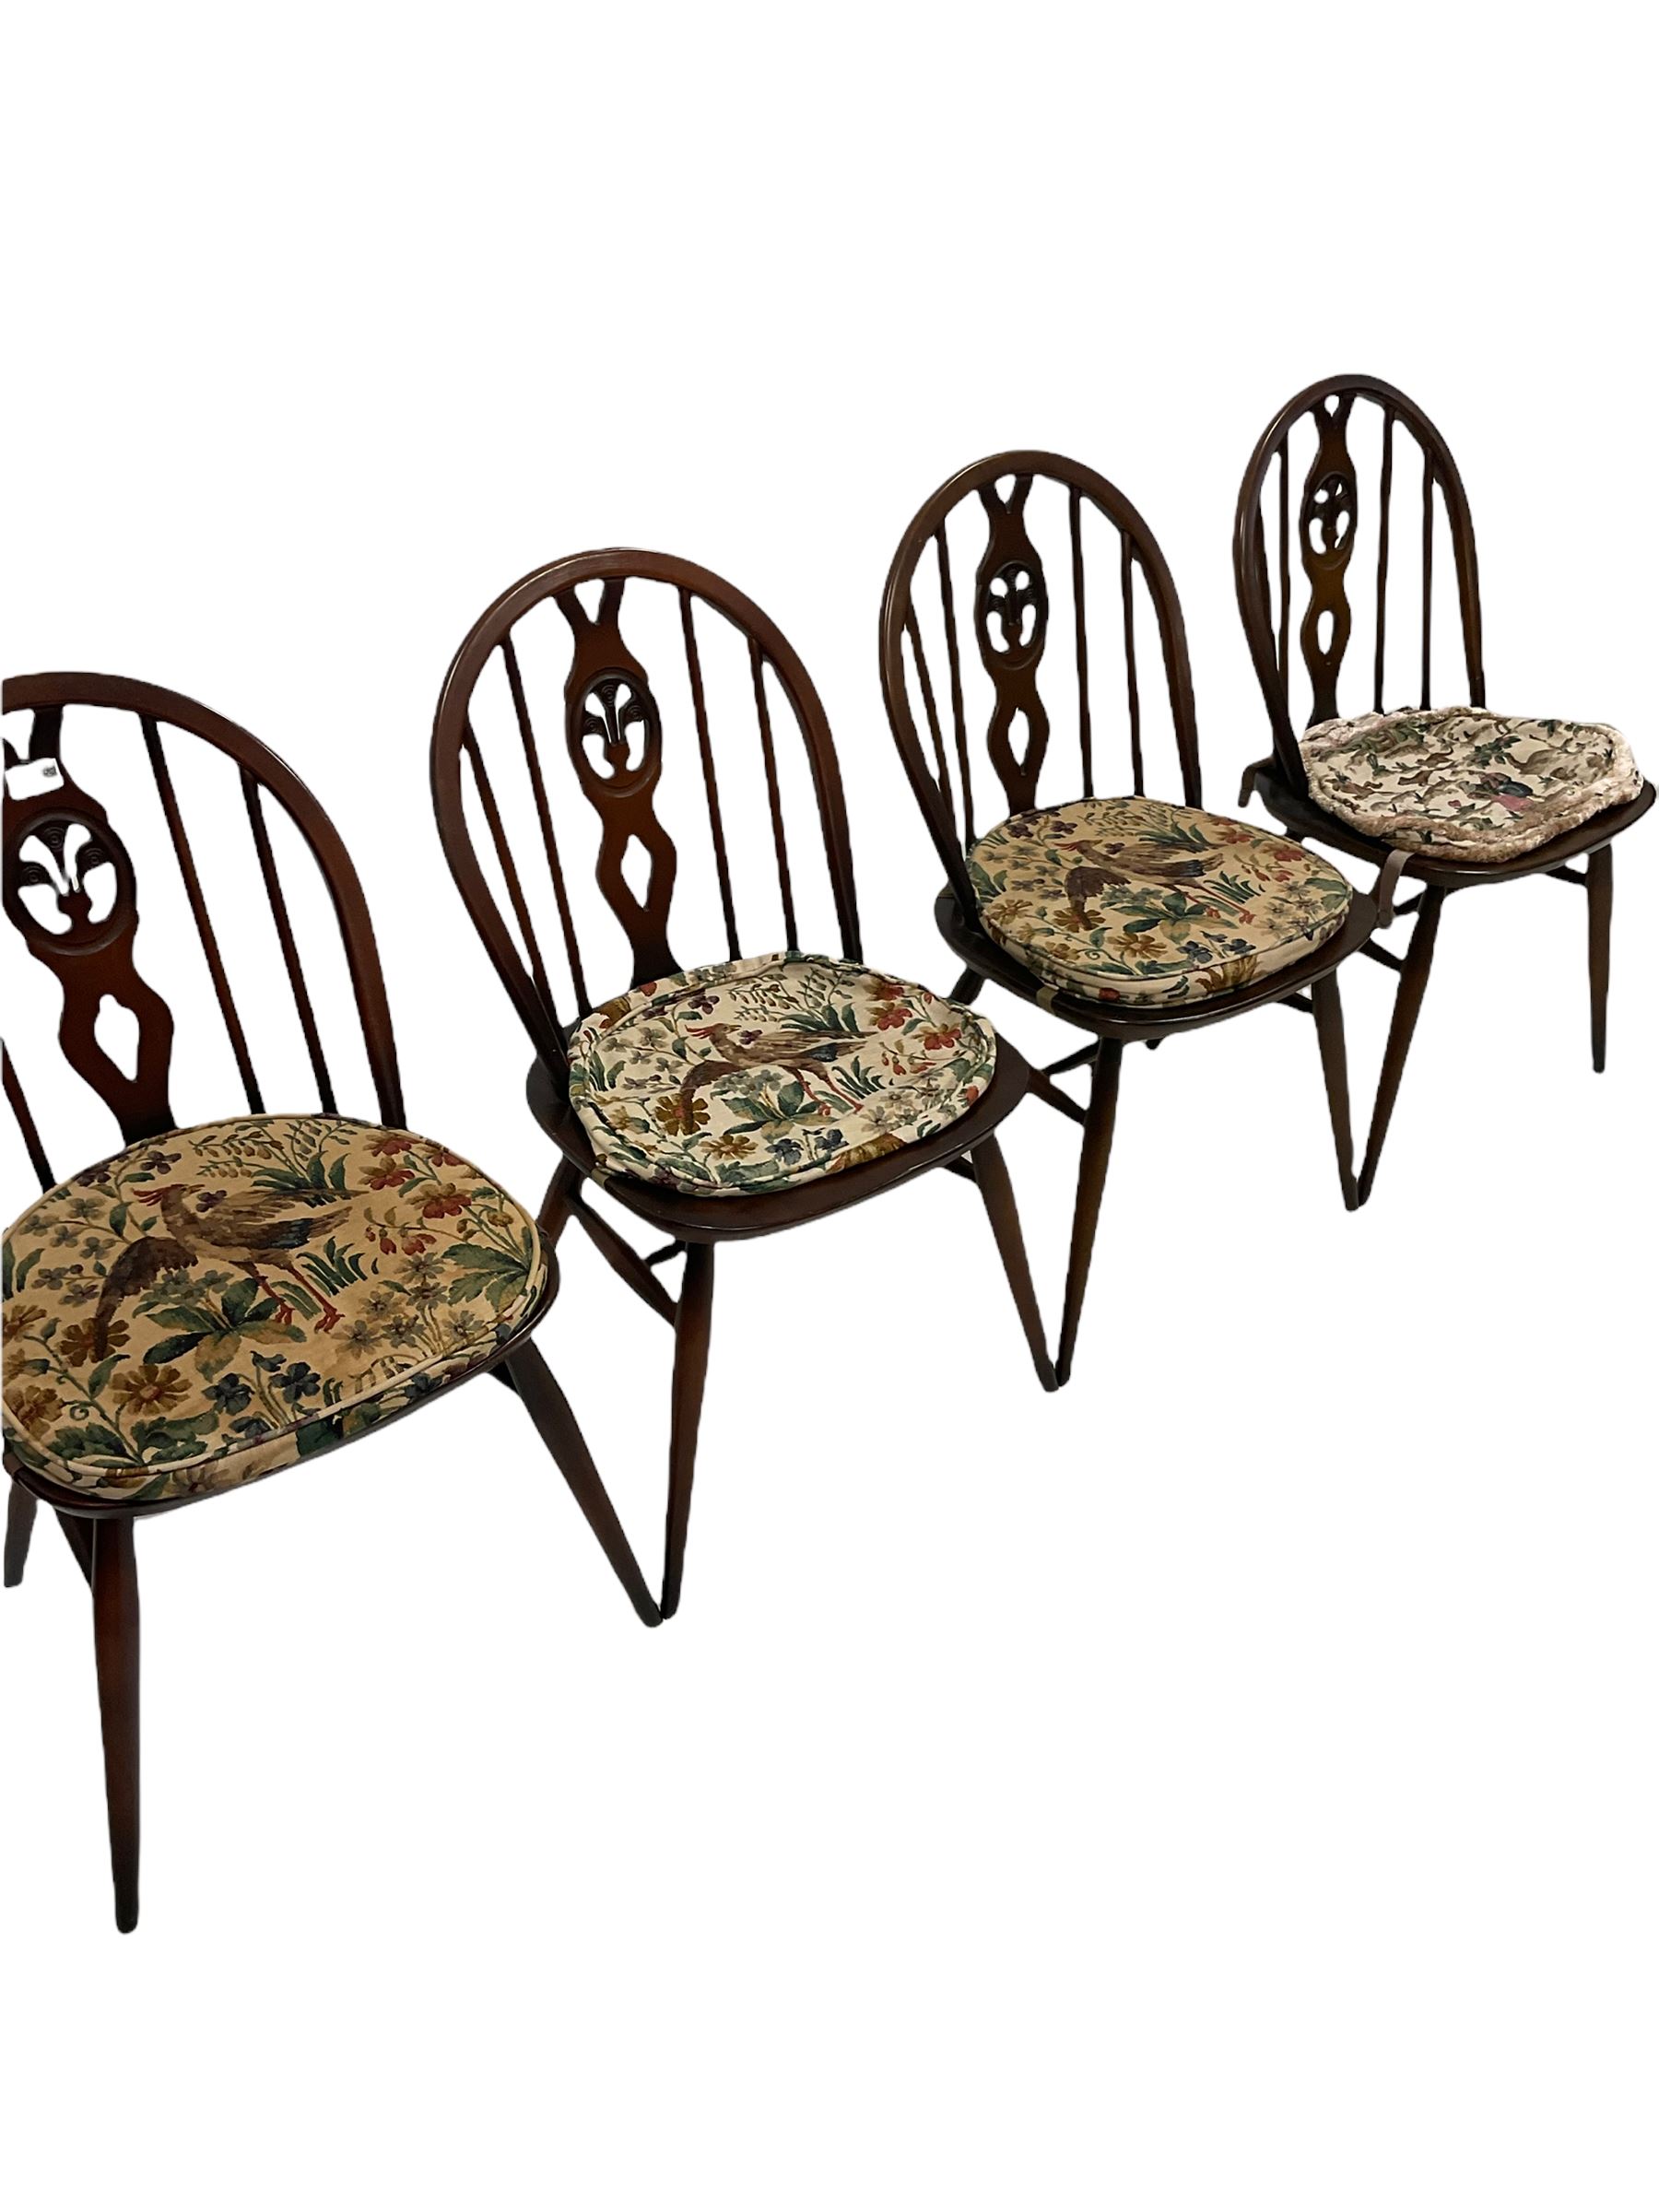 Set of four Ercol dining chairs - Image 2 of 2